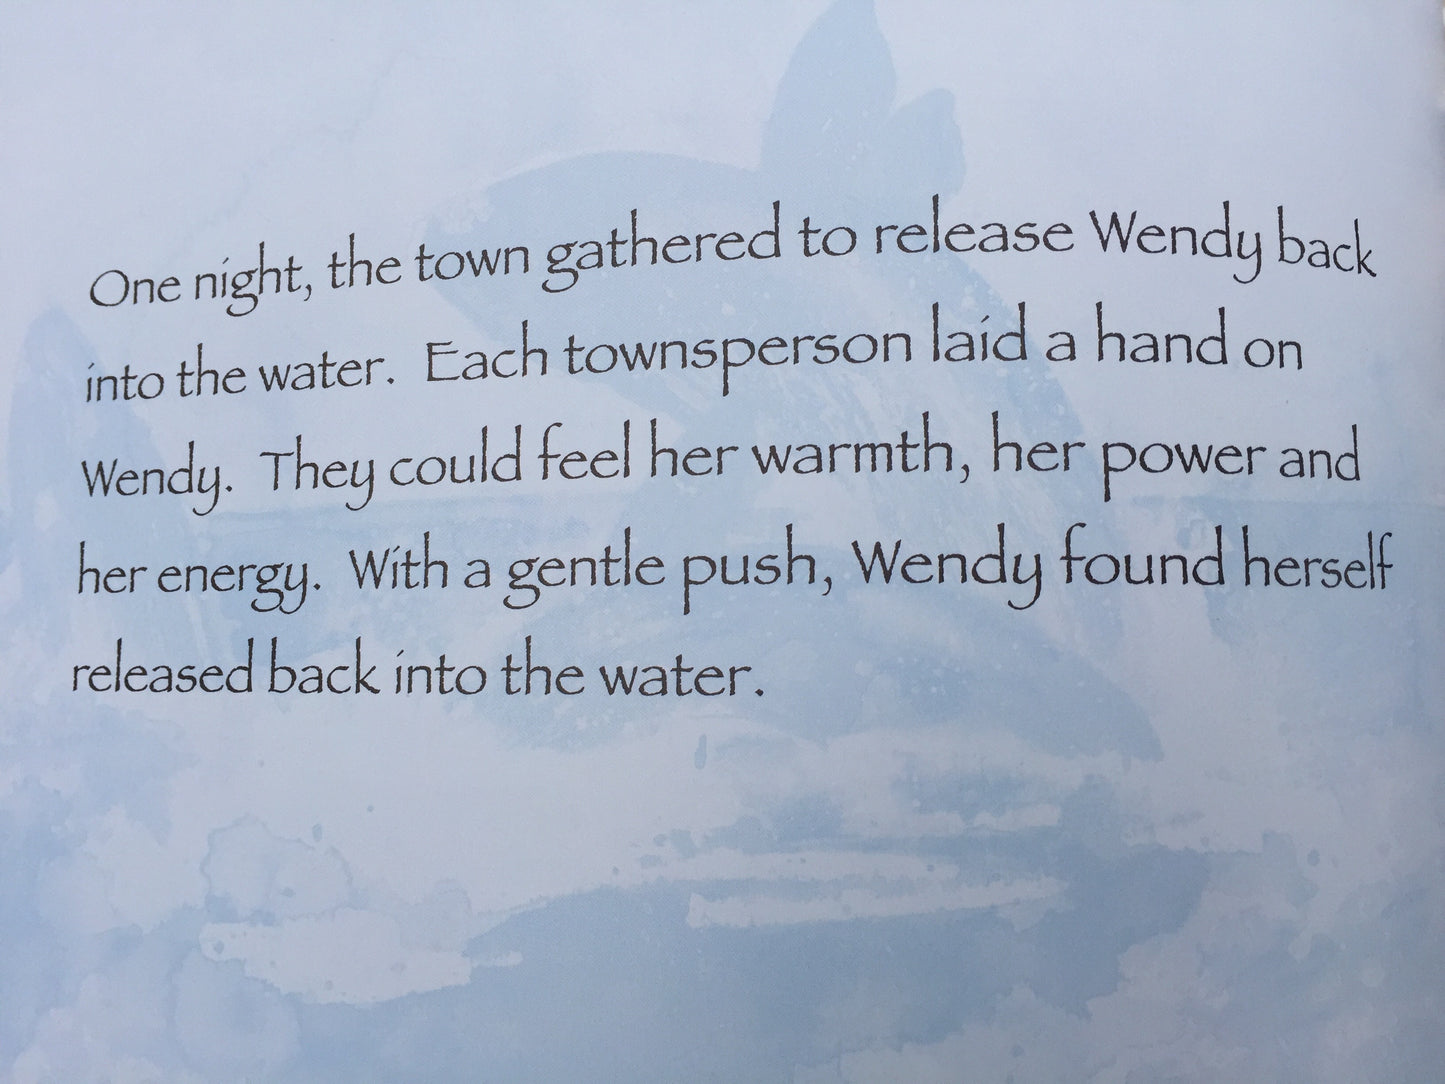 Educational Children's Picture Book - WENDY THE WHALE